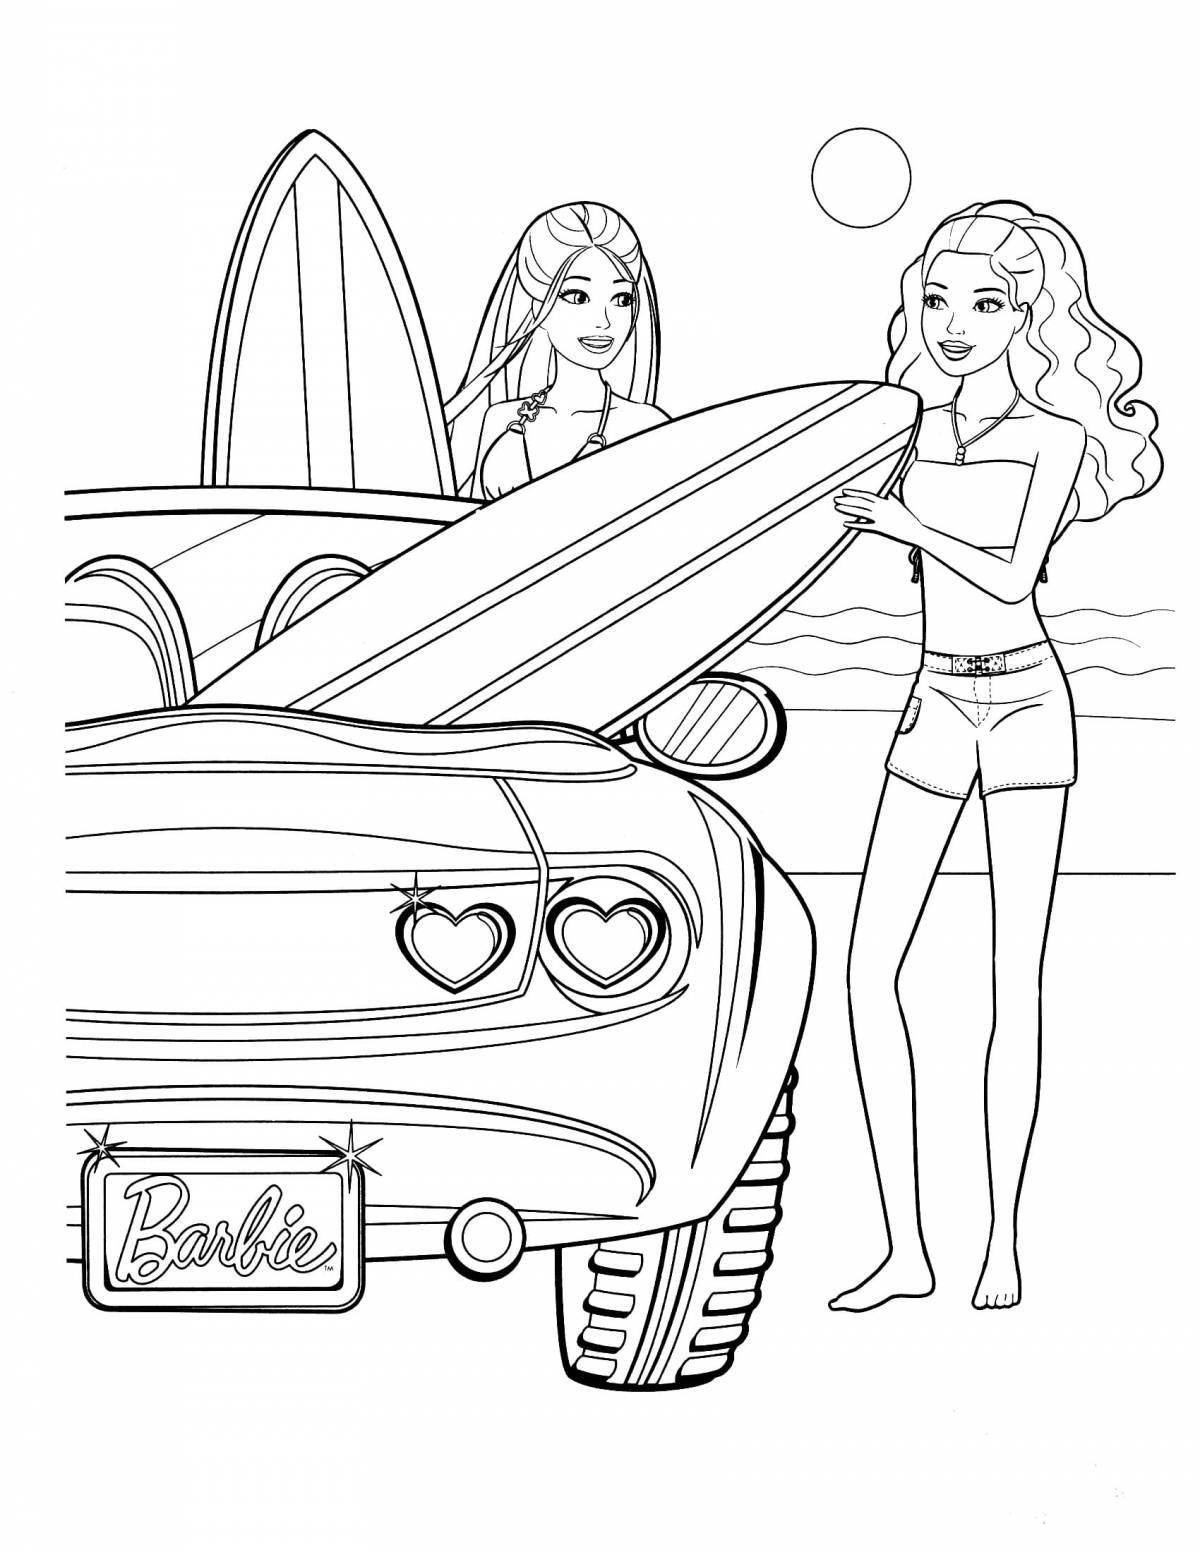 Coloring page royal barbie in swimsuit